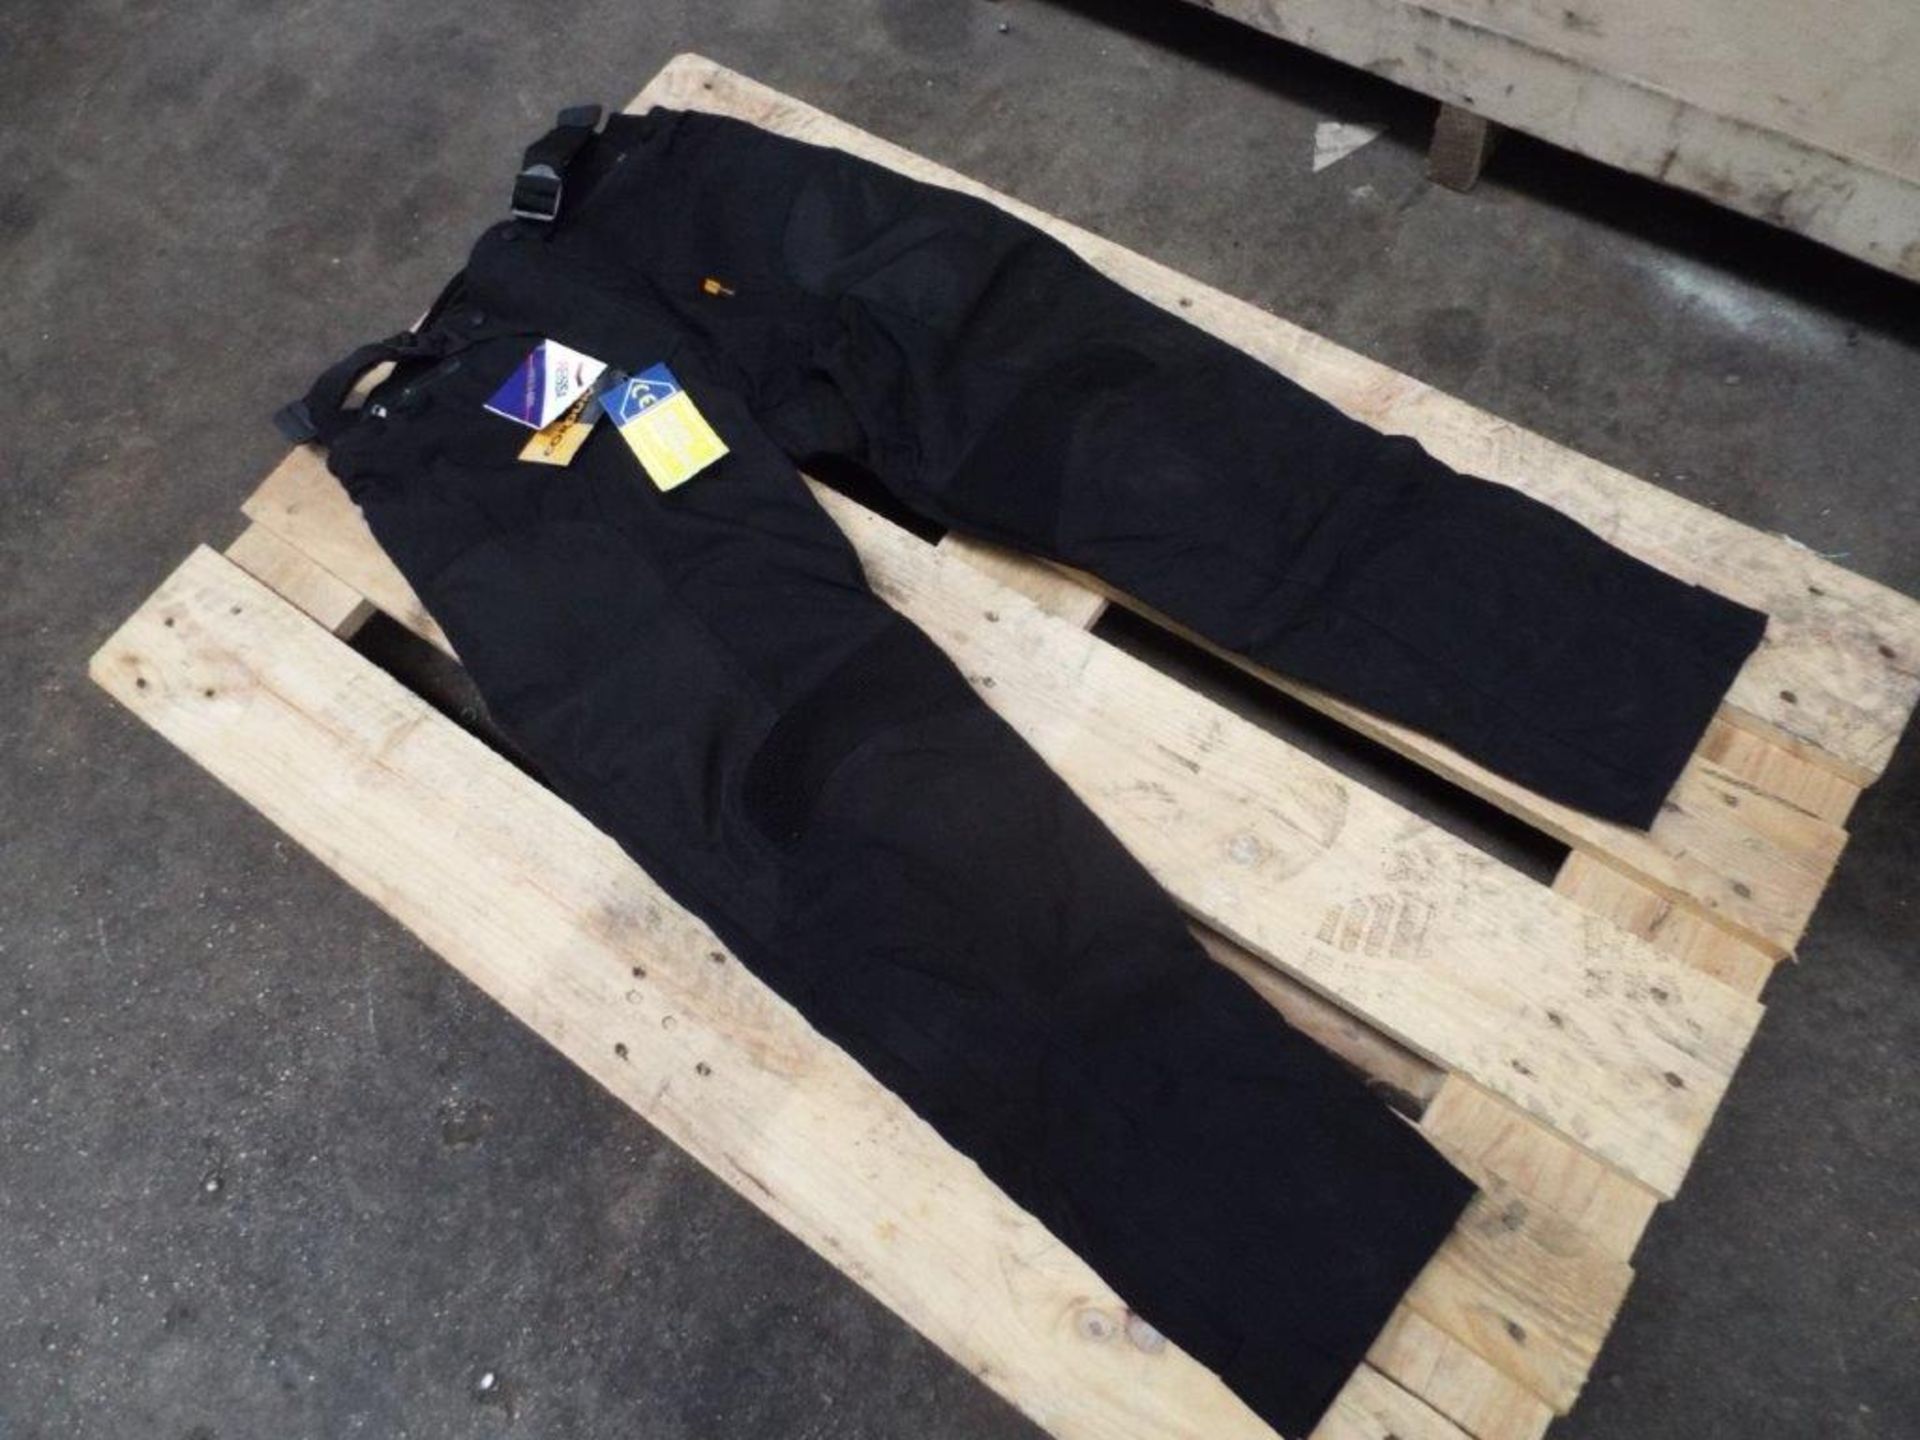 Reissa/Cordura Military Issue Motorcycle Trousers, Size XL